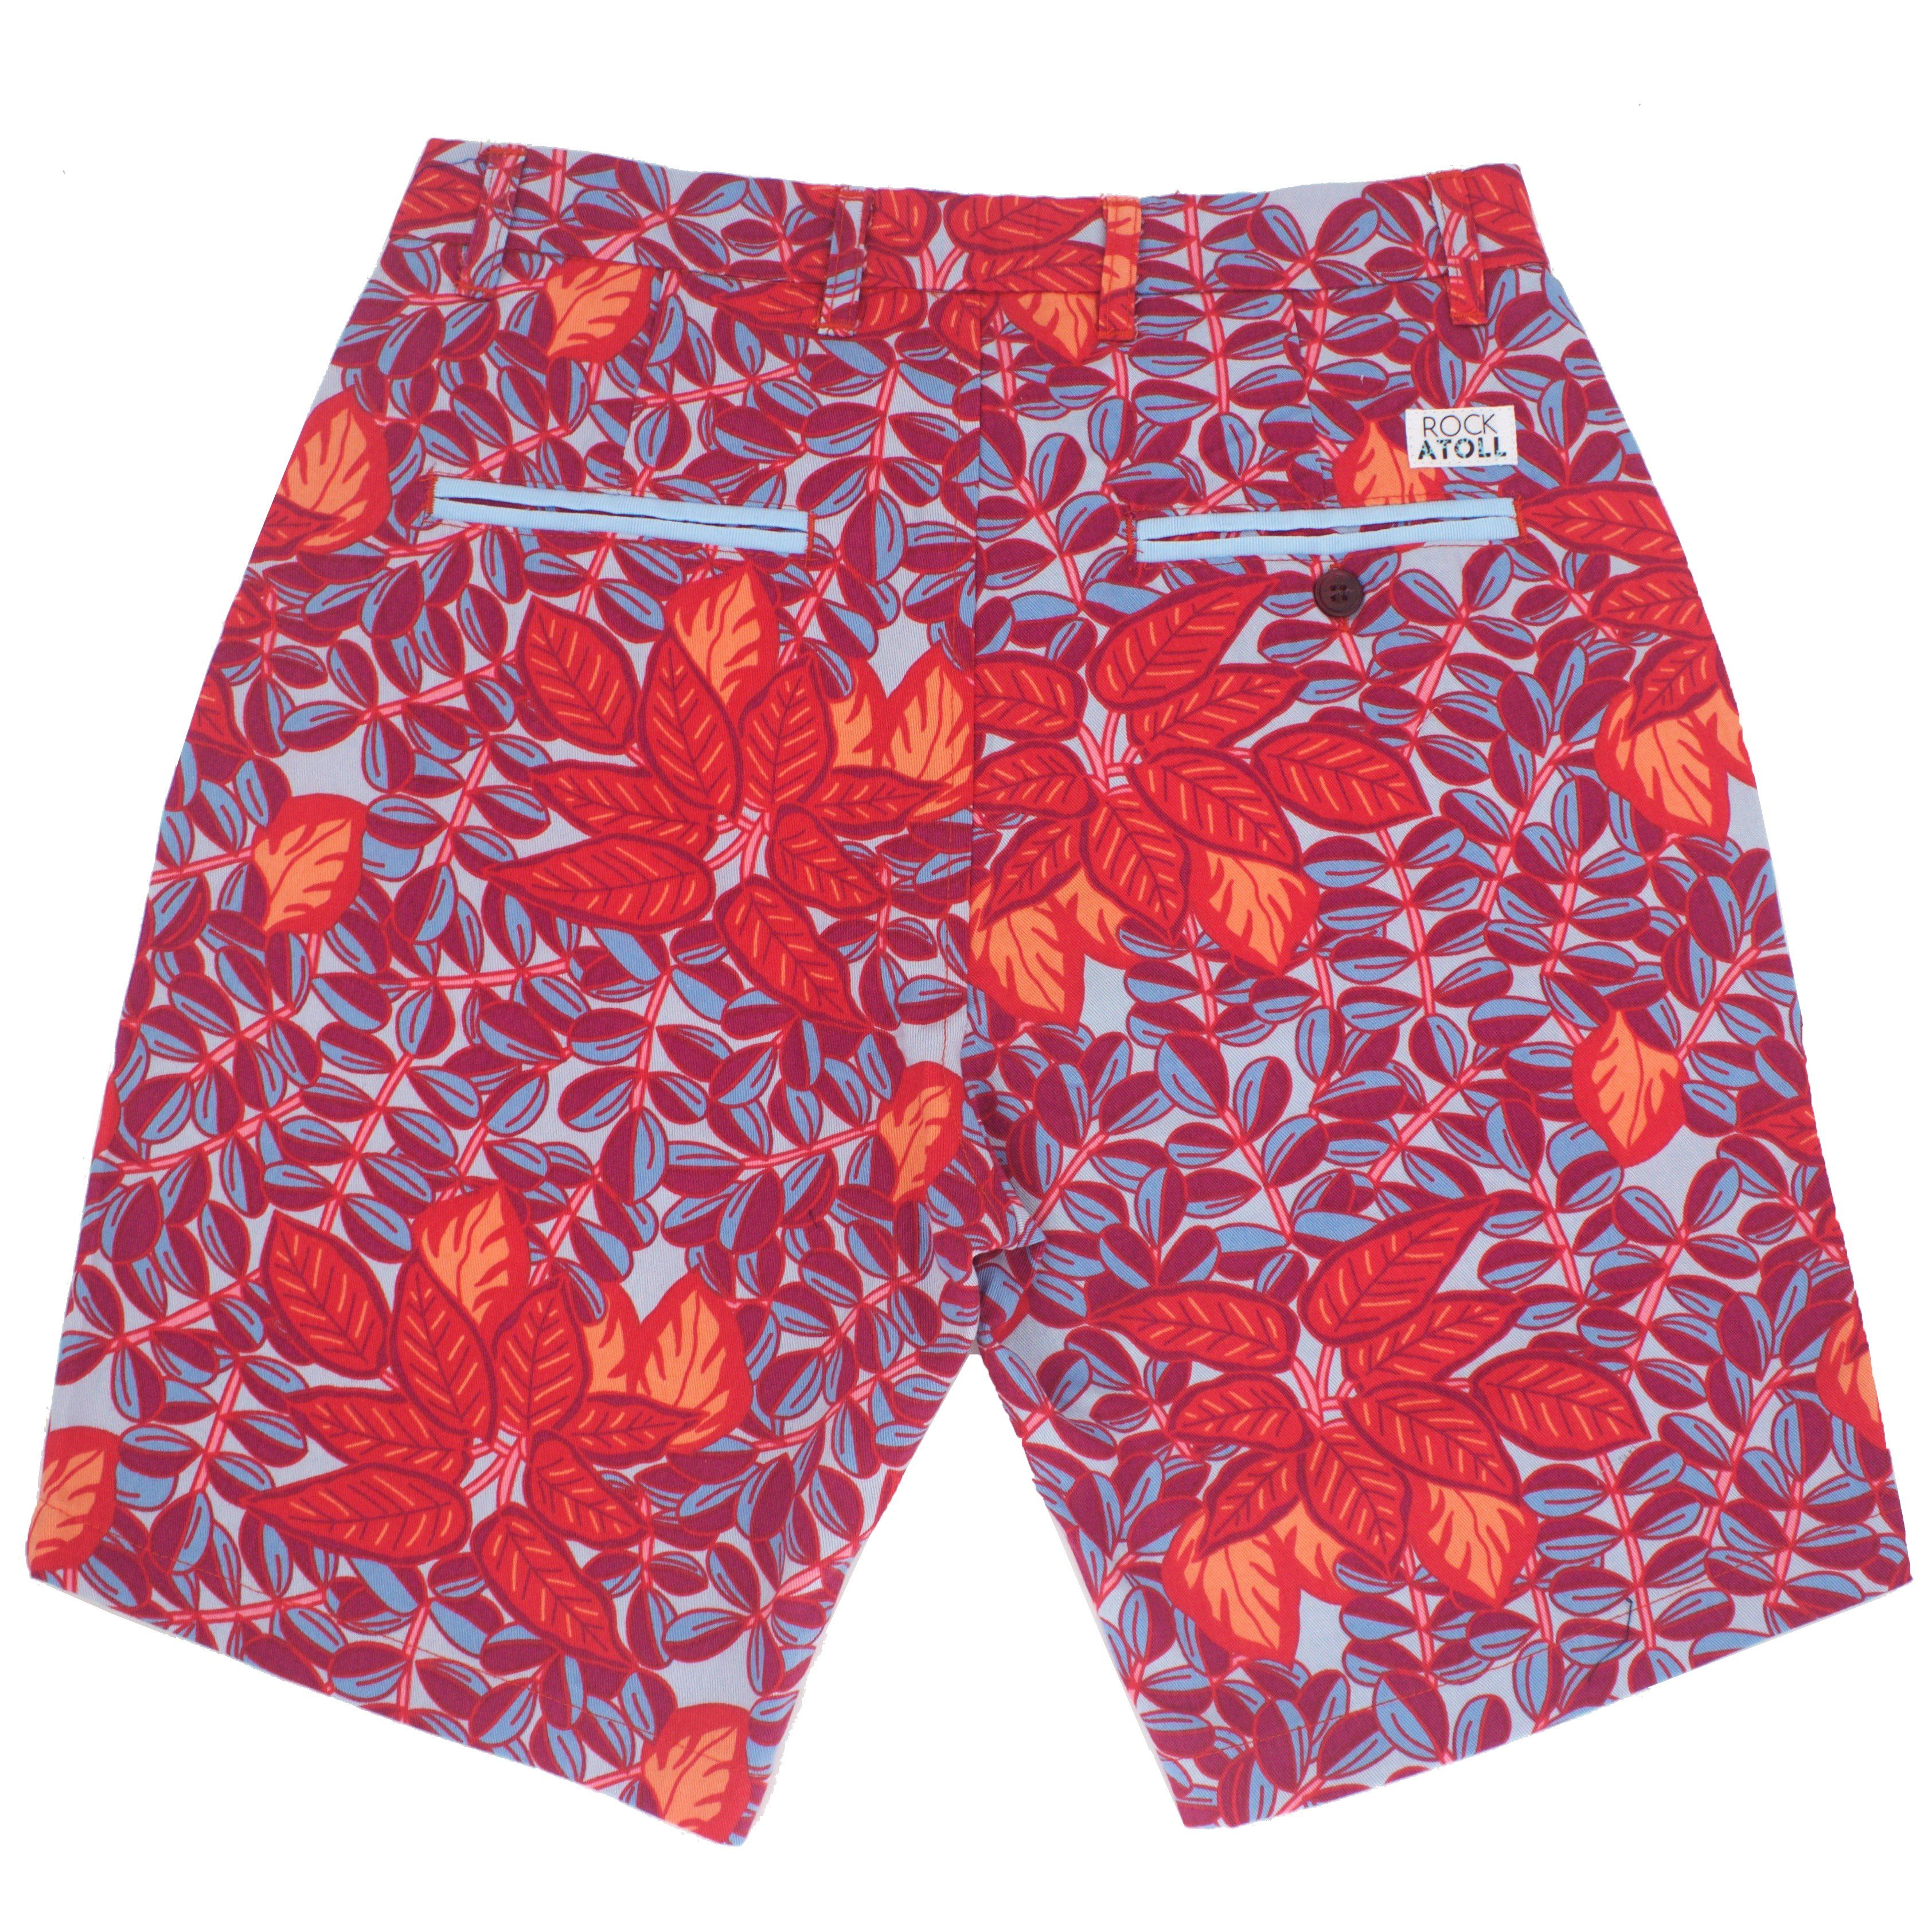 Bright Red Colorful and Bold Leaf All Over Print Chino Shorts